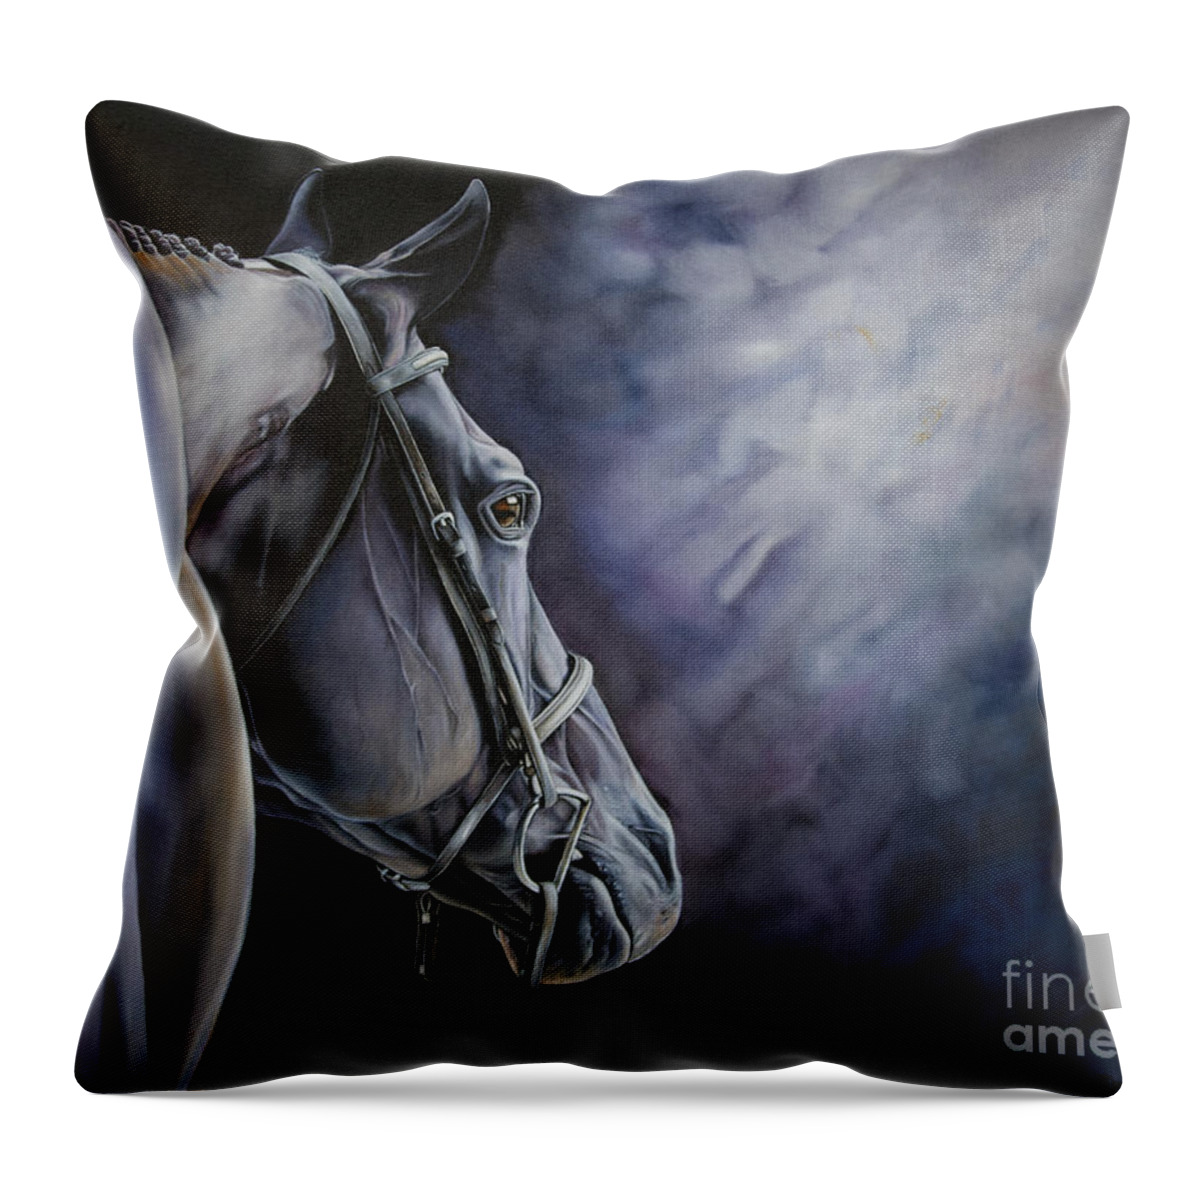 Oil Throw Pillow featuring the painting Dave by Joni Beinborn